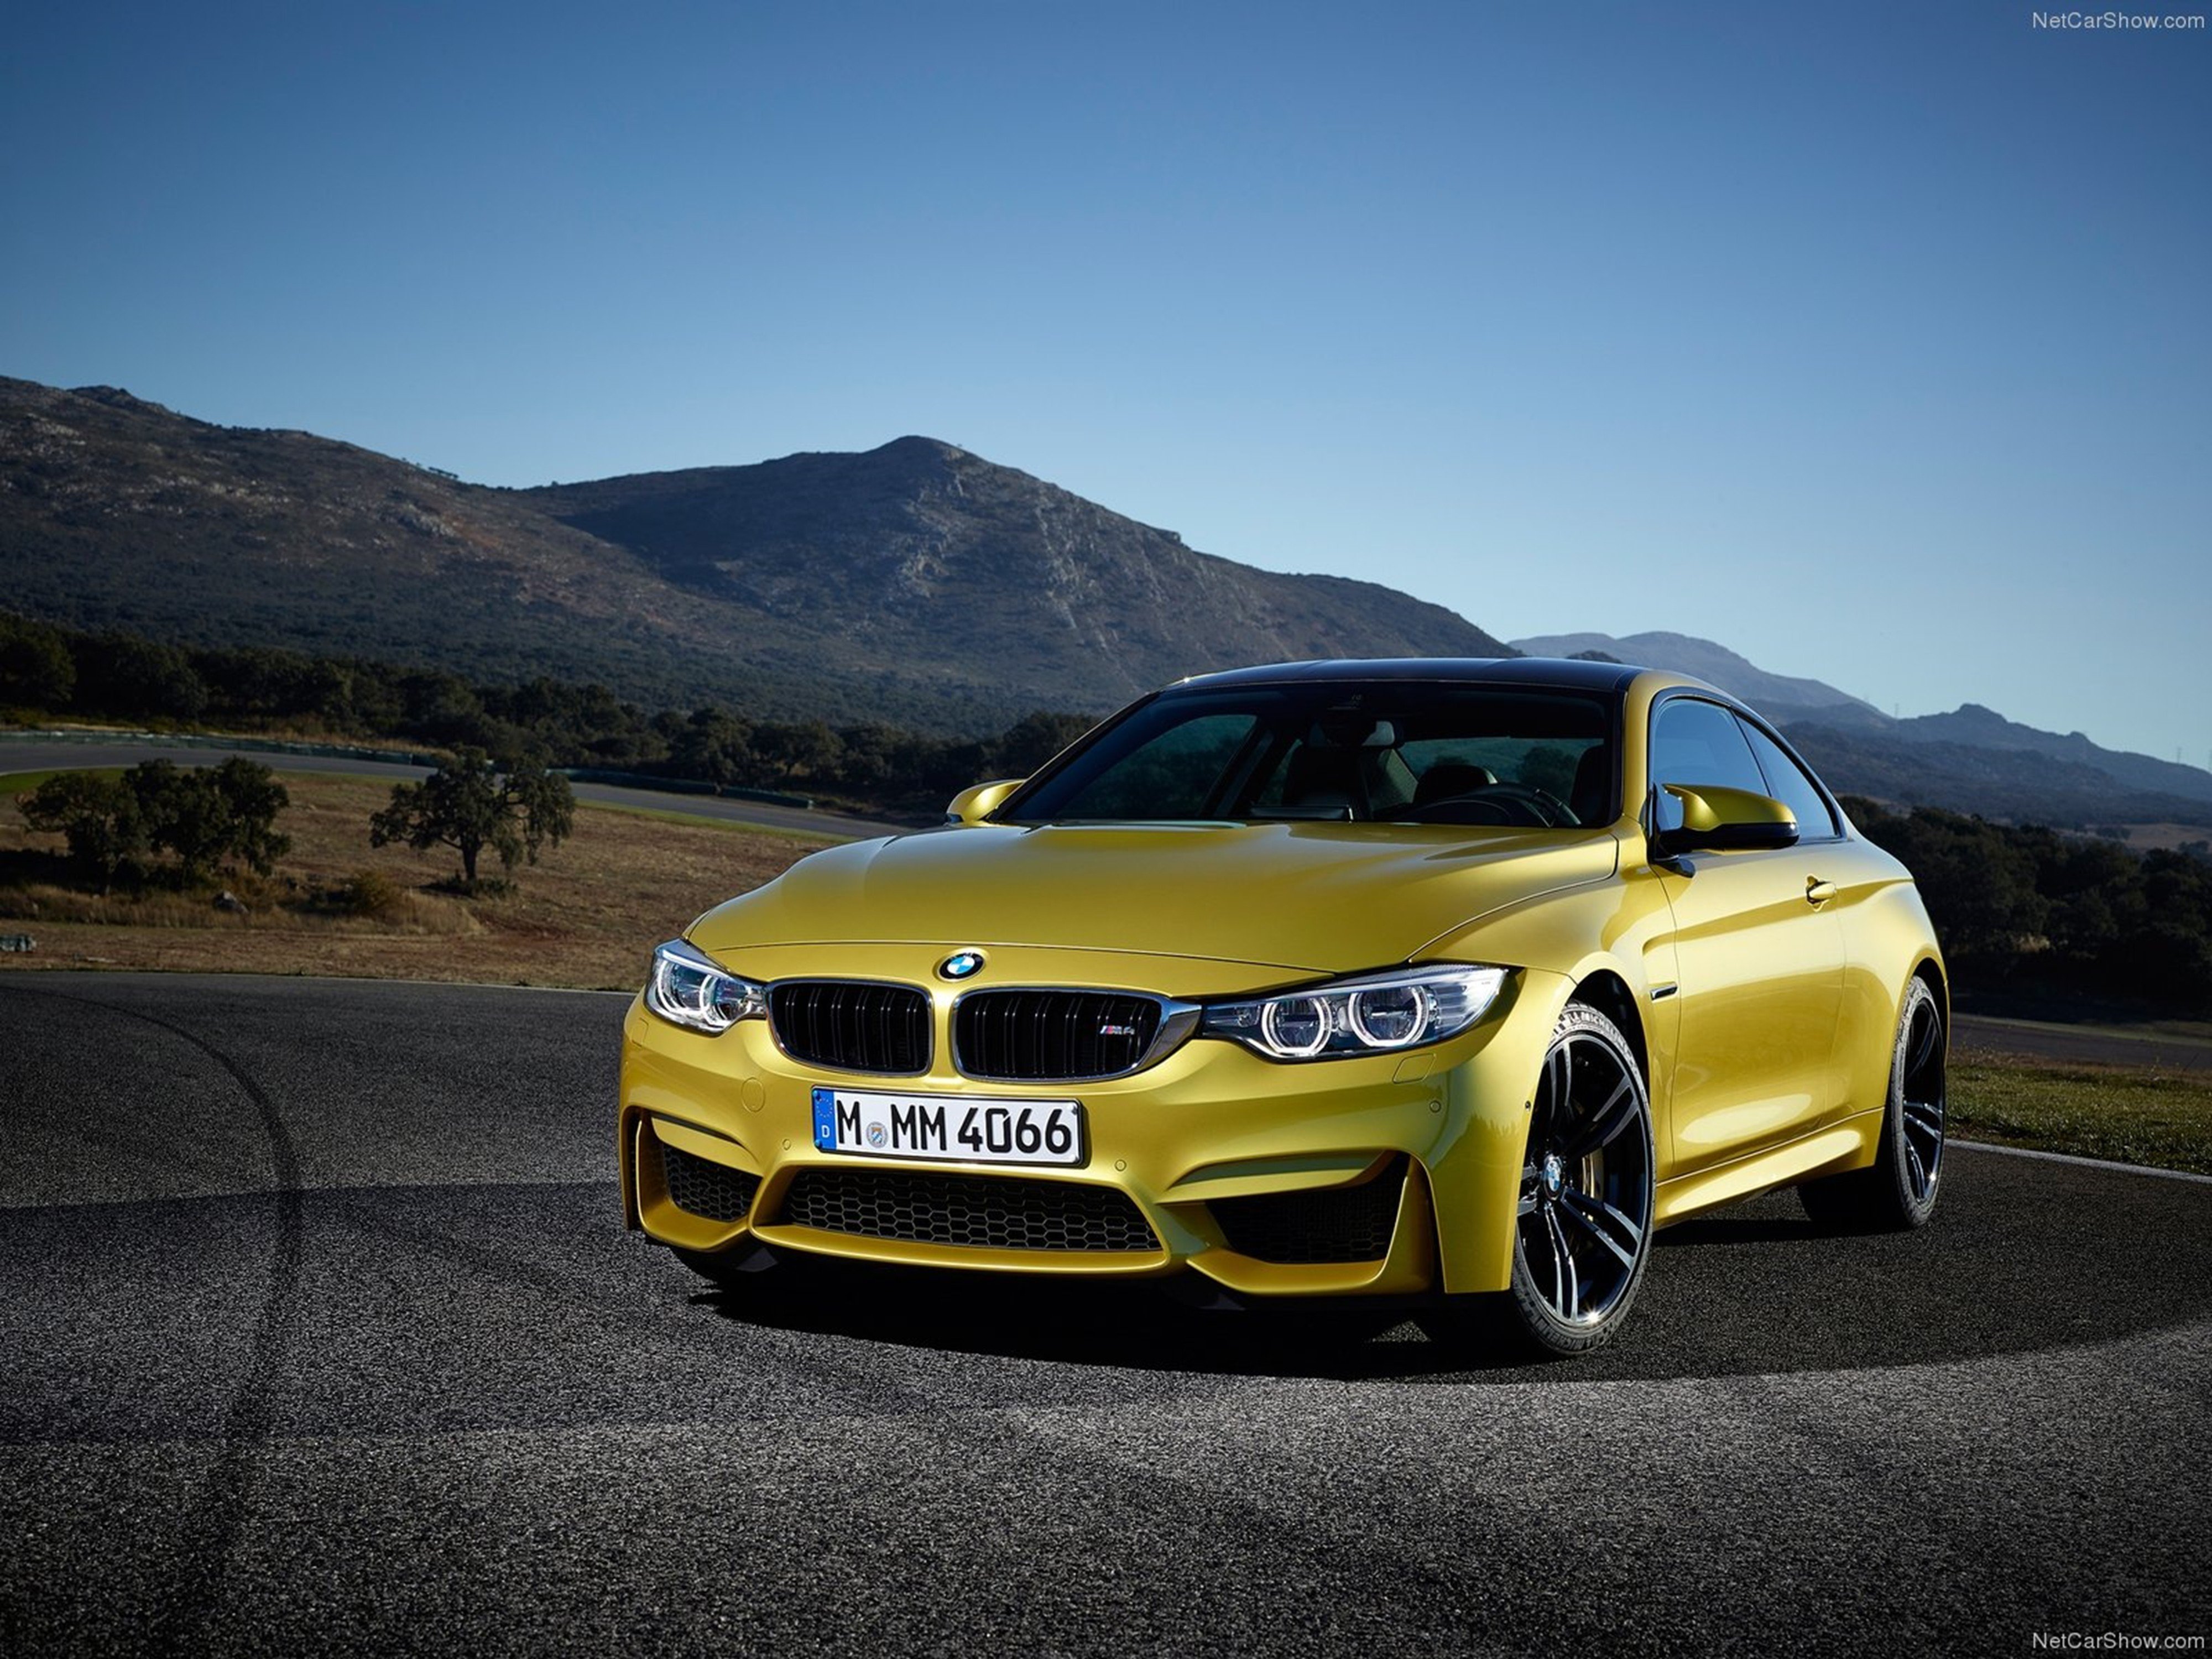 Bmw m4 coupe. BMW m4 2015. BMW m4 Coupe f82.